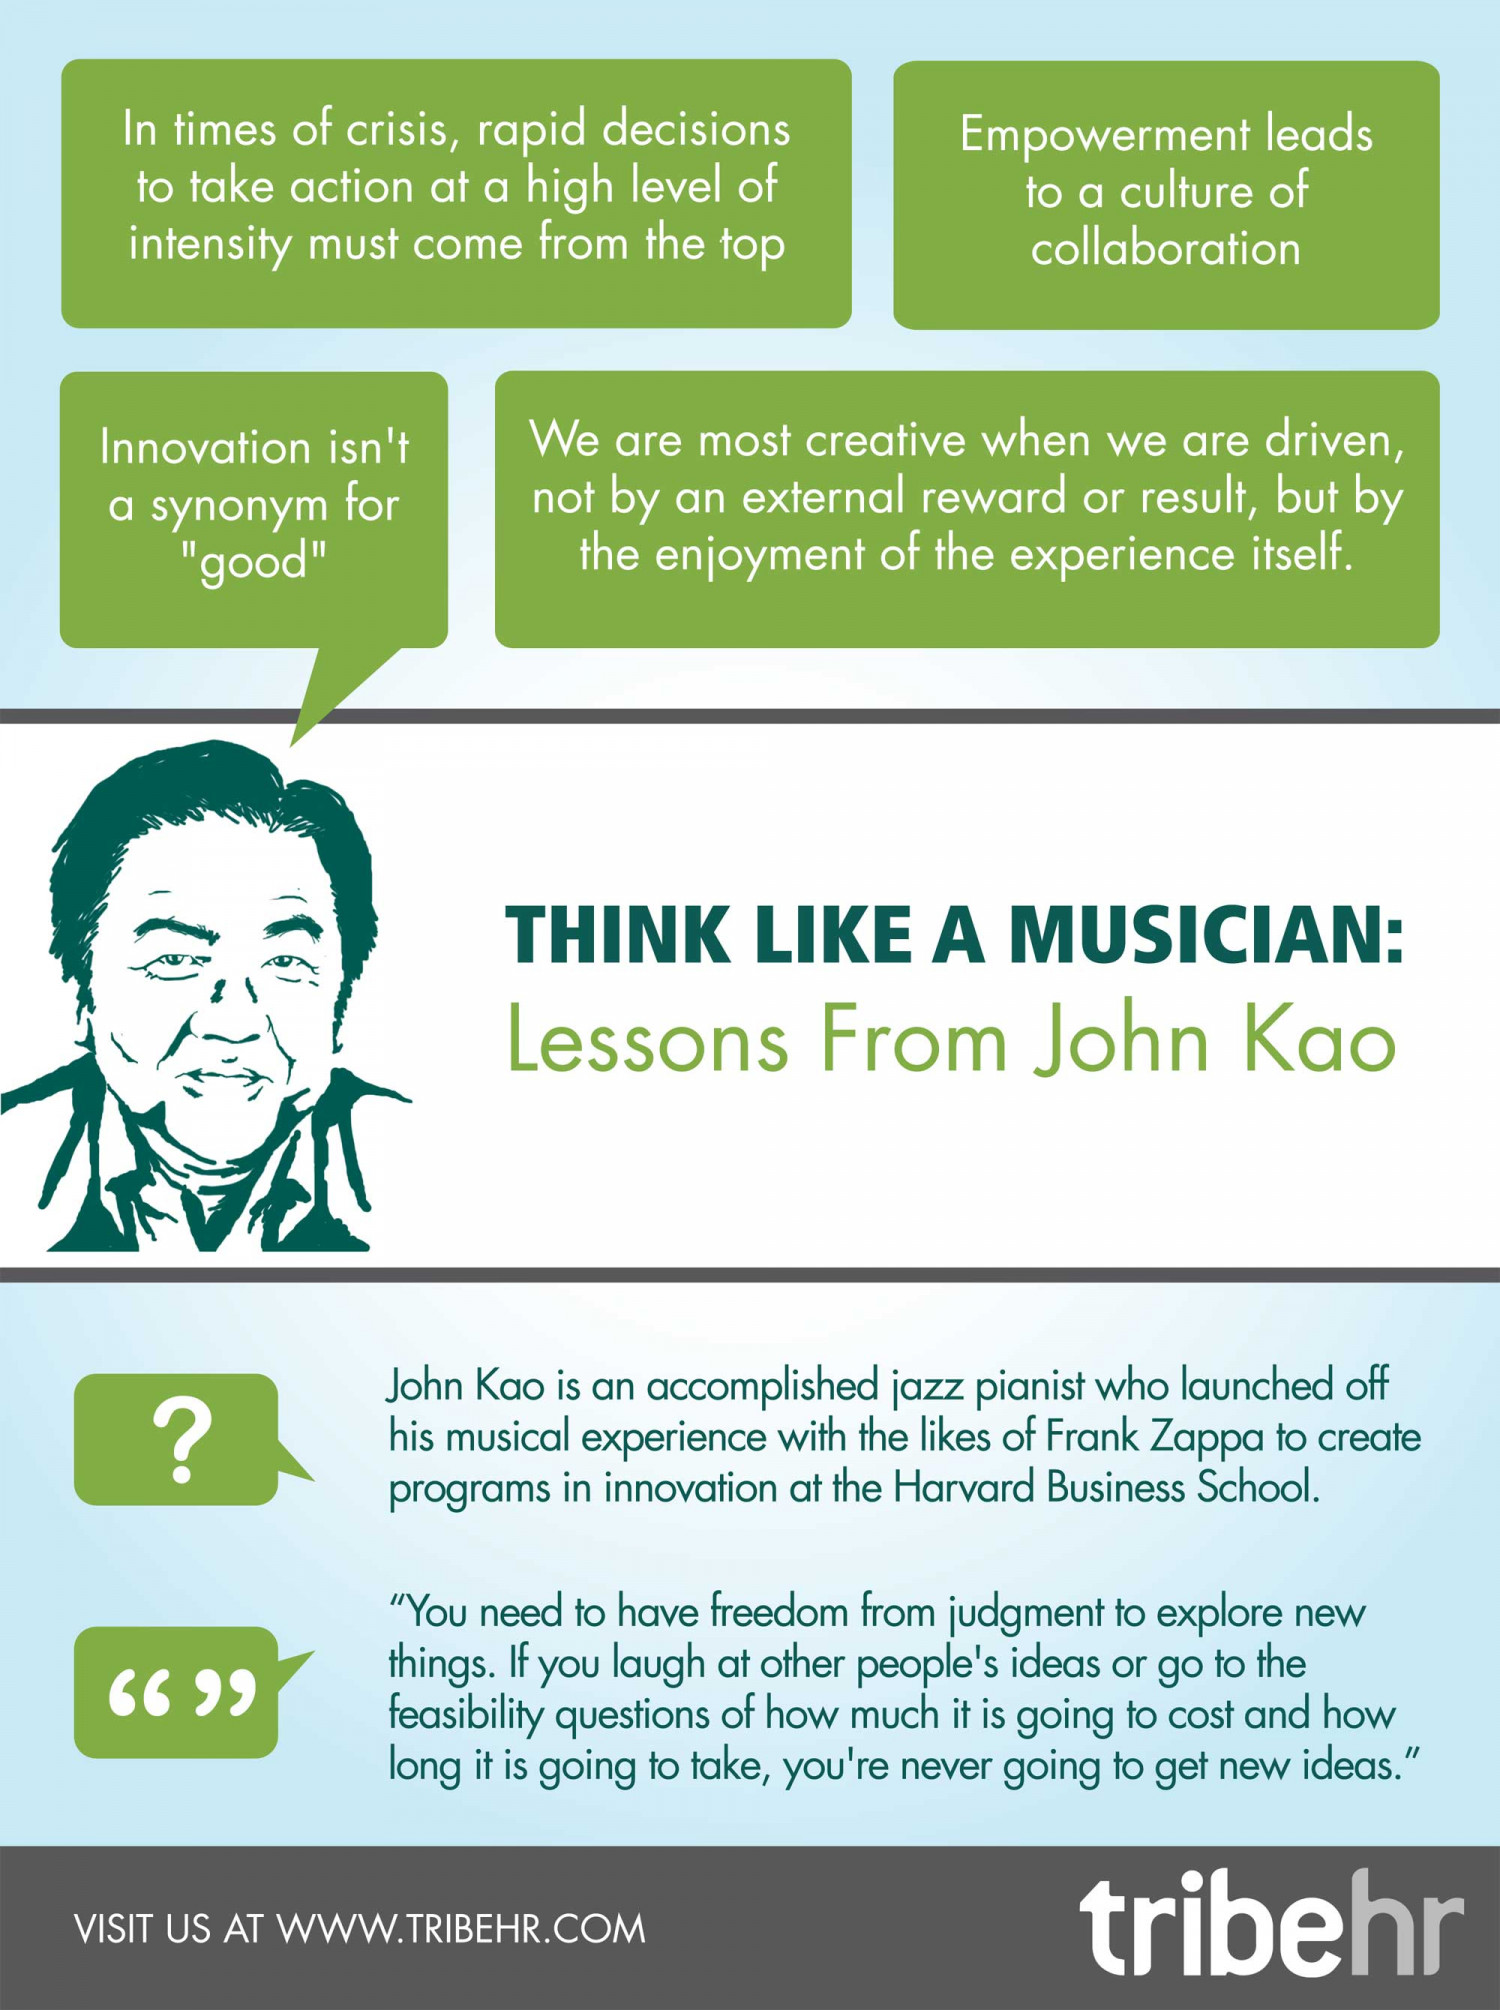 Think Like a Musician: HR Lessons from John Kao Infographic